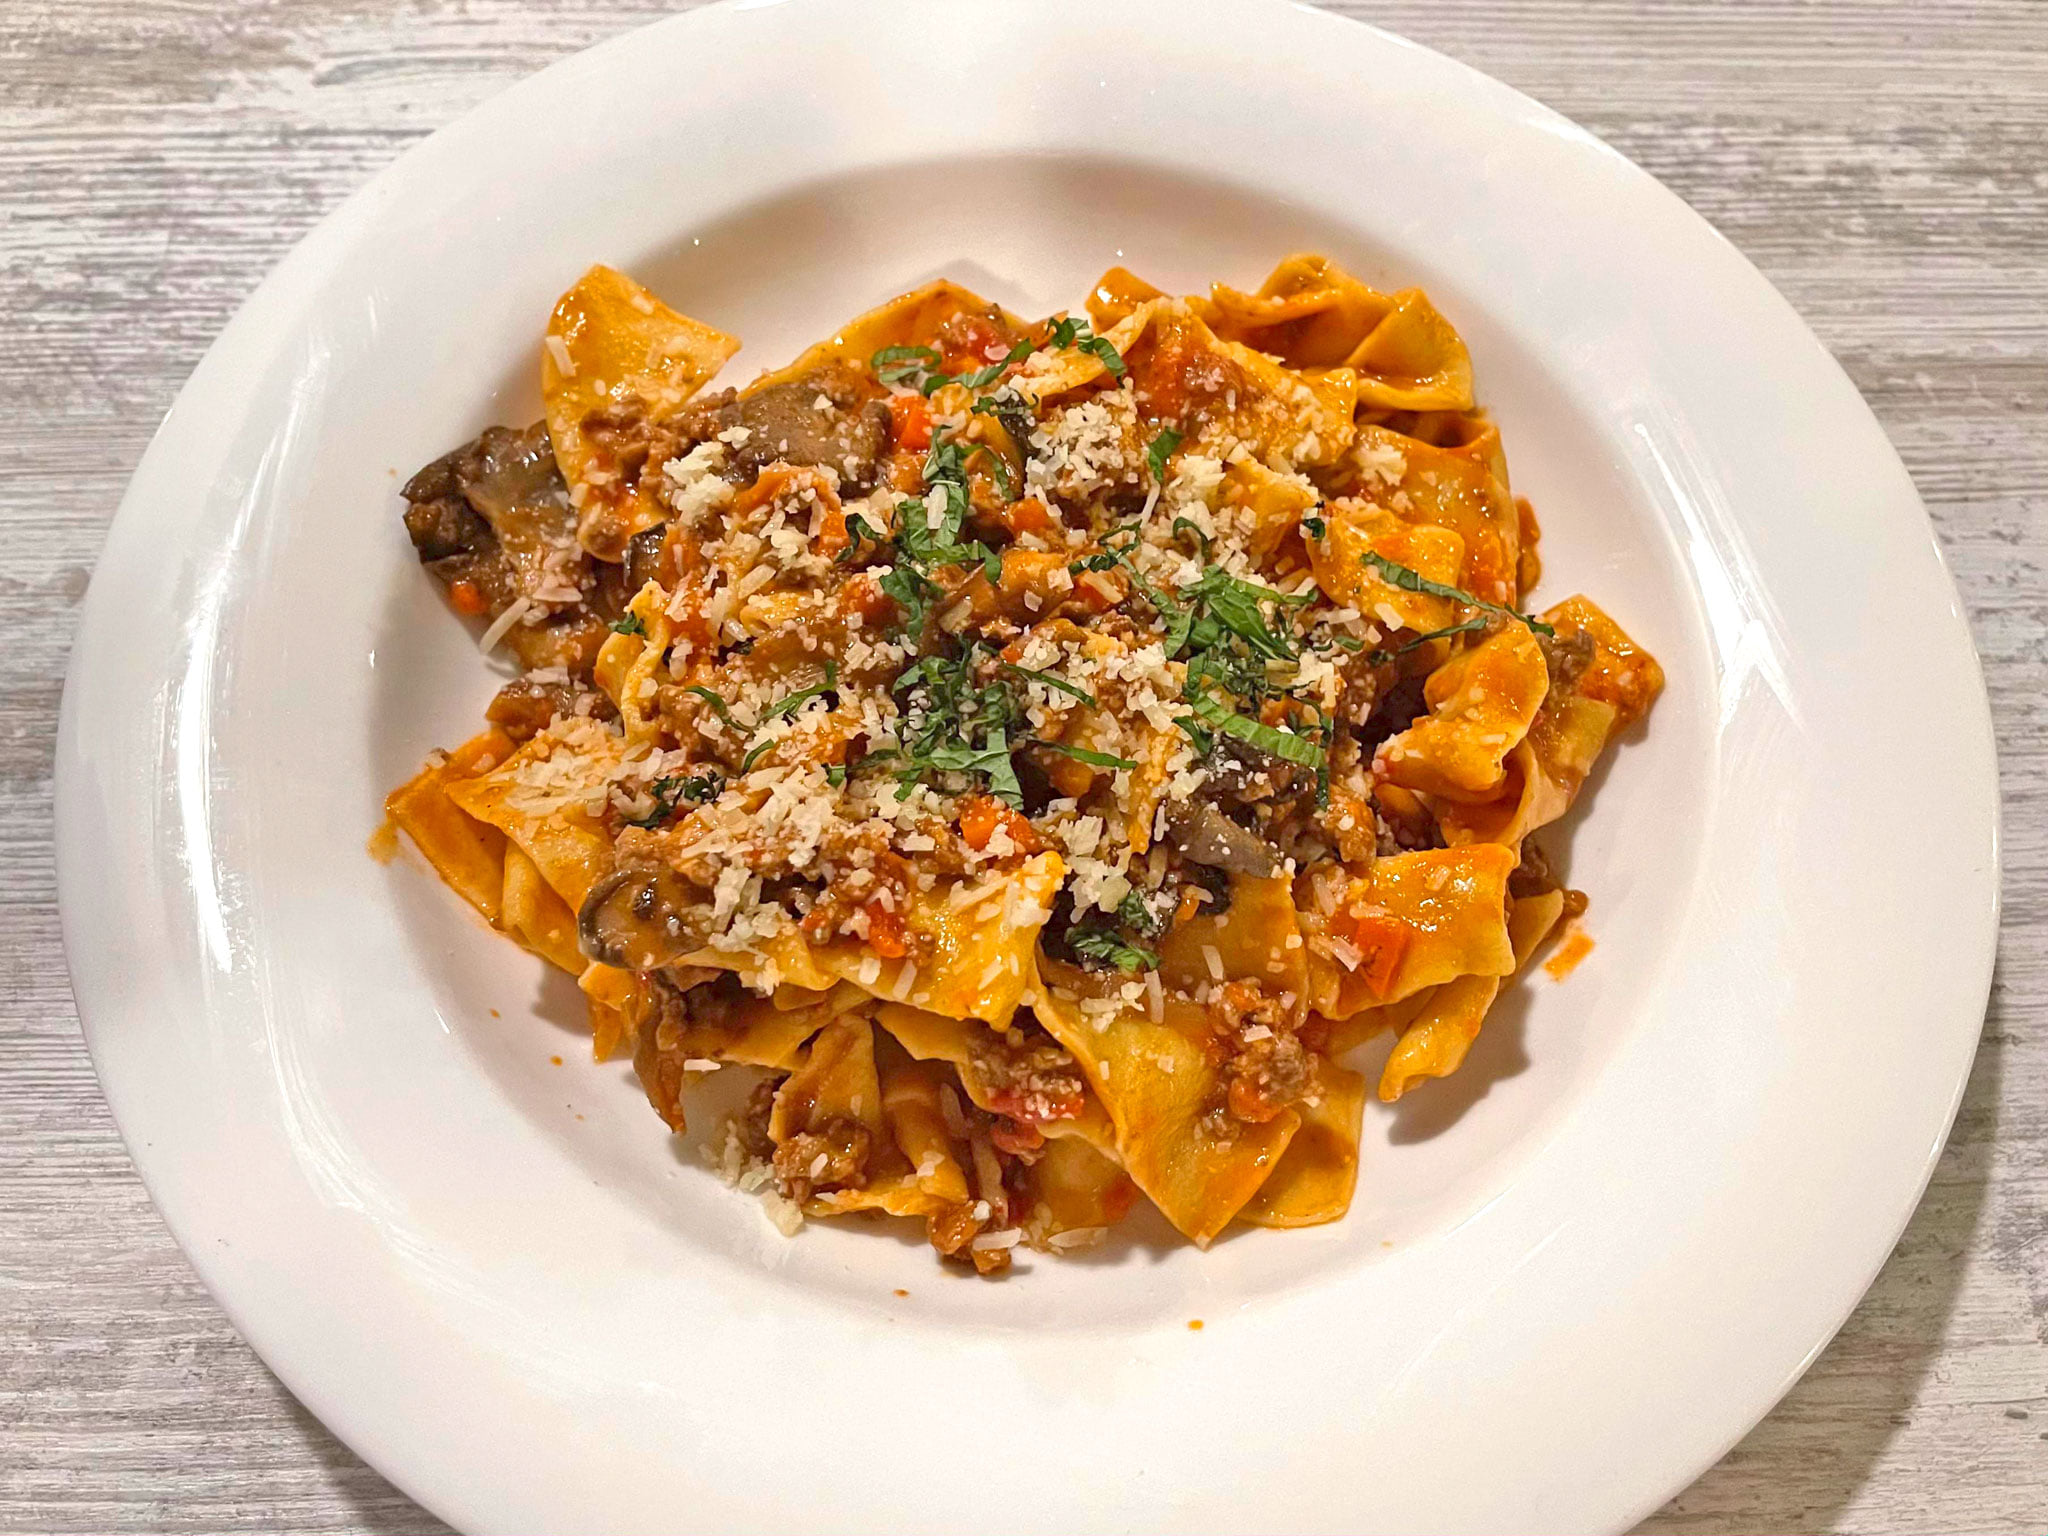 Pappardelle - oyster mushrooms, caramelized Tropia onion, lamb sugo, mint.